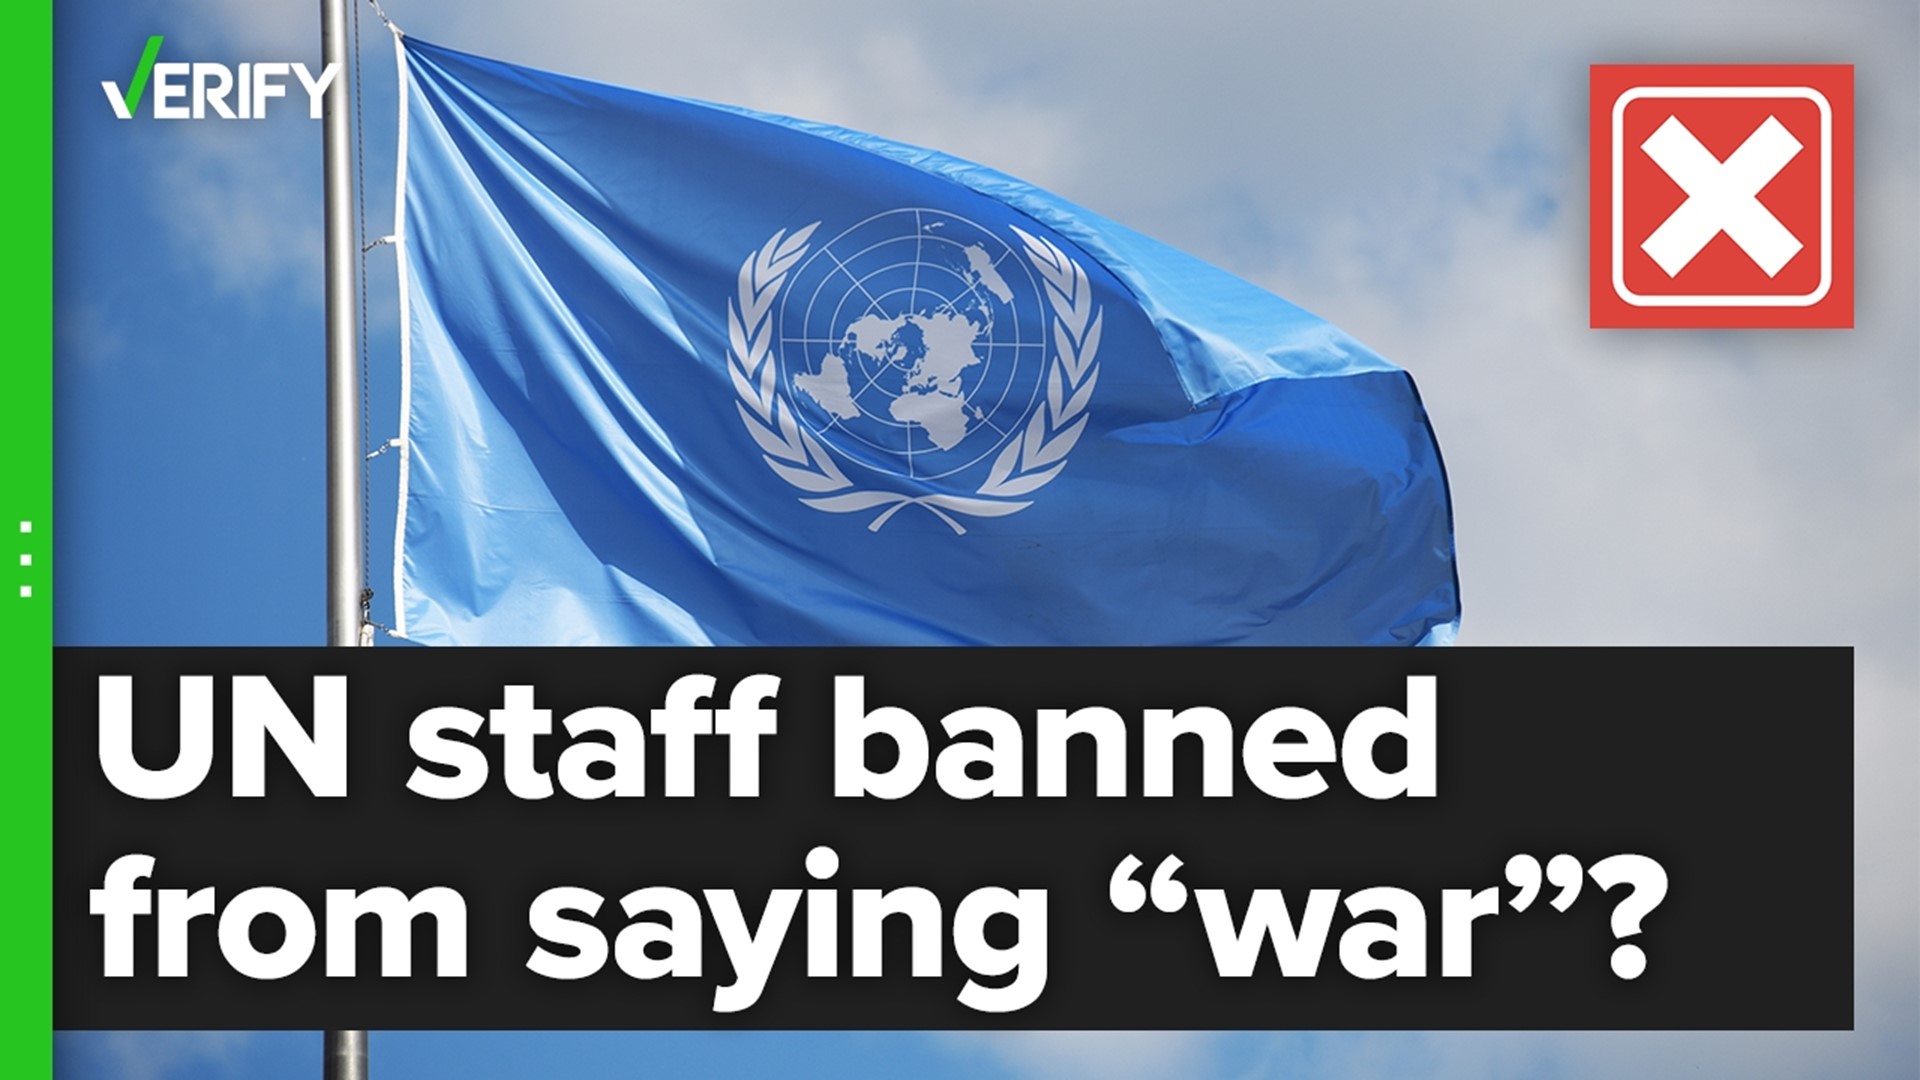 Internal emails show some staffers were initially told not to use certain words, but that is not current UN policy.